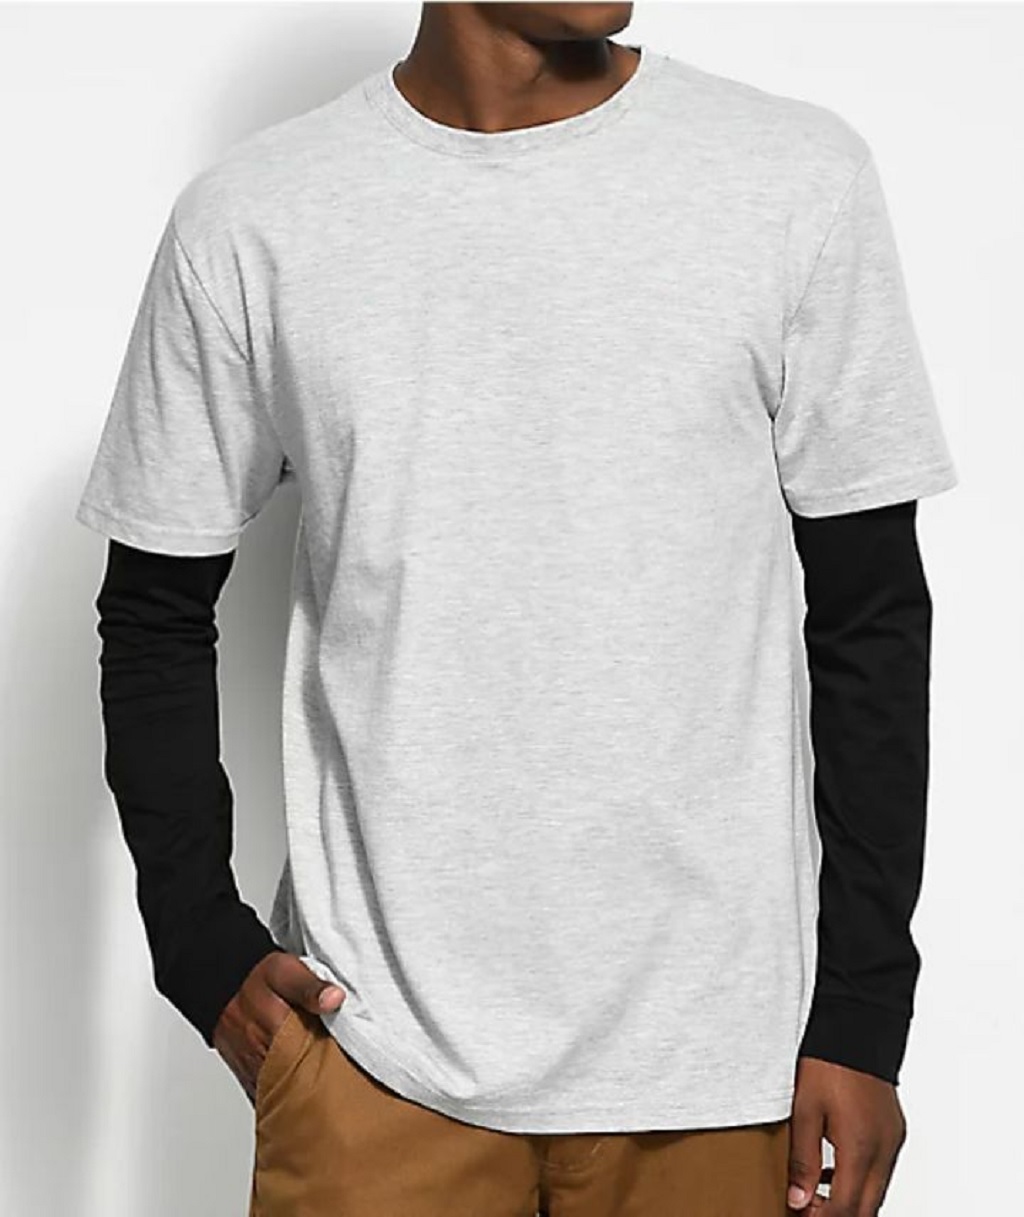 The Casual Look – Long-sleeves under the T-shirt